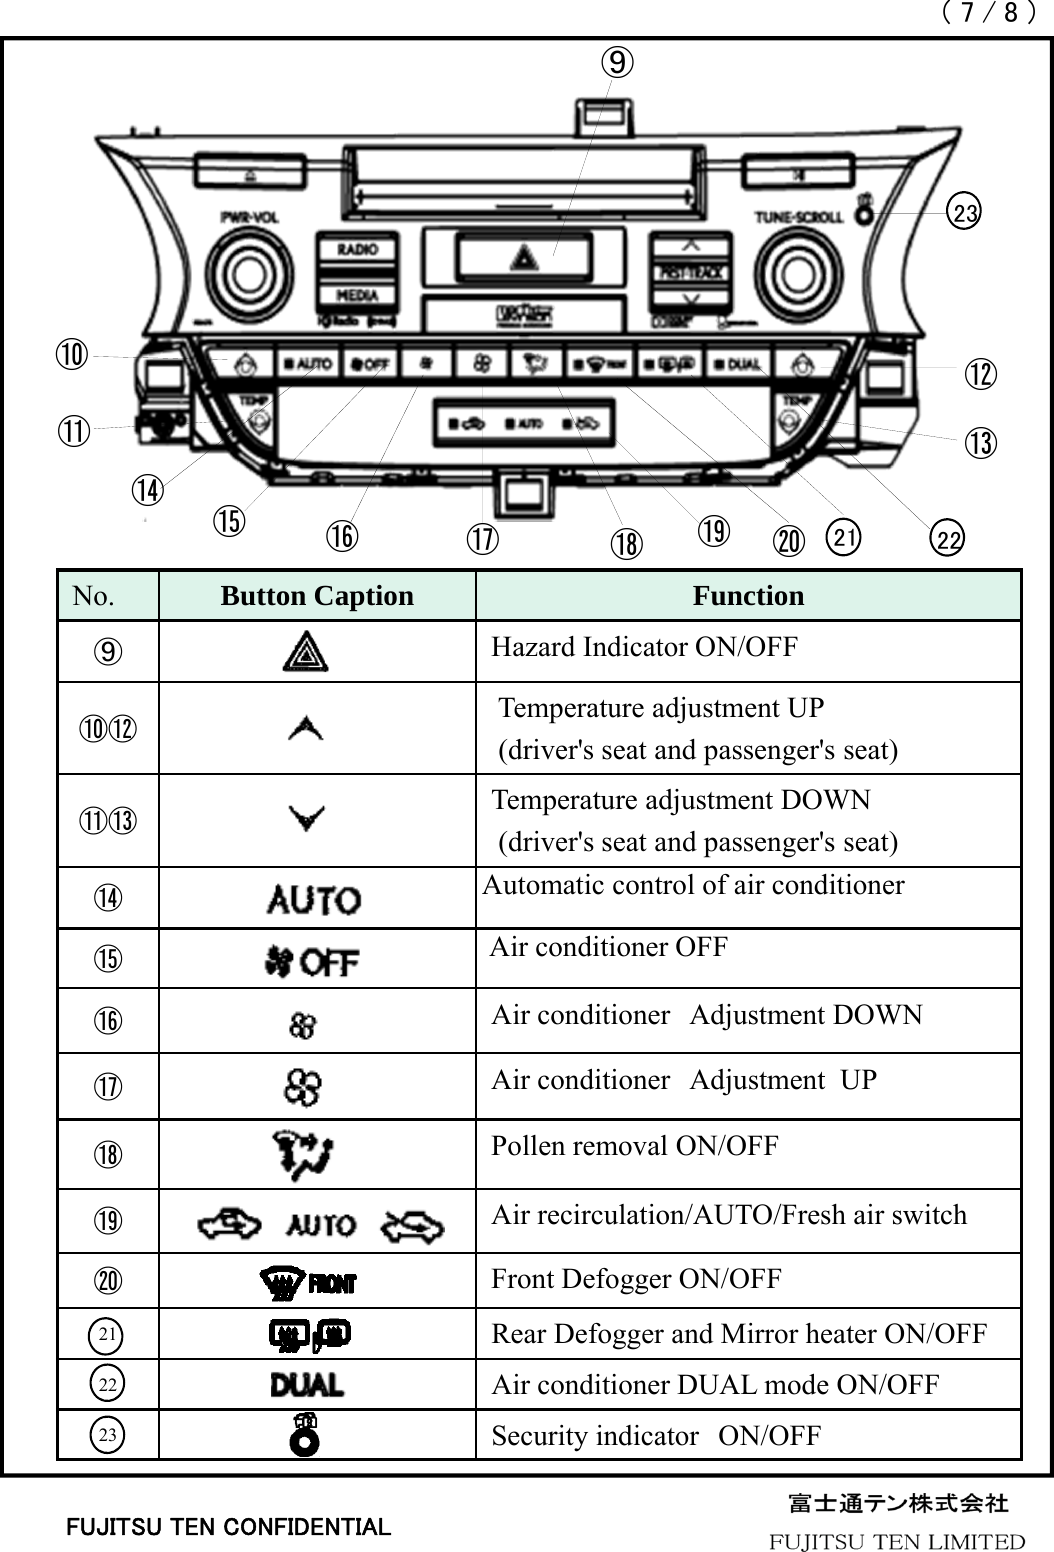 （7/8）FUJITSU TEN CONFIDENTIALNo. Button Caption Function⑨Hazard Indicator ON/OFF⑩⑫ Temperature adjustment UP(driver&apos;s seat and passenger&apos;s seat)⑪⑬ Temperature adjustment DOWN(driver&apos;s seat and passenger&apos;s seat)⑭Automatic control of air conditioner⑮Air conditioner OFF⑯Air conditioner Adjustment DOWN⑰Air conditioner Adjustment  UP⑱Pollen removal ON/OFF⑲Air recirculation/AUTO/Fresh air switch⑳Front Defogger ON/OFF21 Rear Defogger and Mirror heater ON/OFF22 Air conditioner DUAL mode ON/OFF23 Security indicator ON/OFF⑨⑪⑲⑭⑮⑯⑰⑫⑬⑩⑳21⑱2223